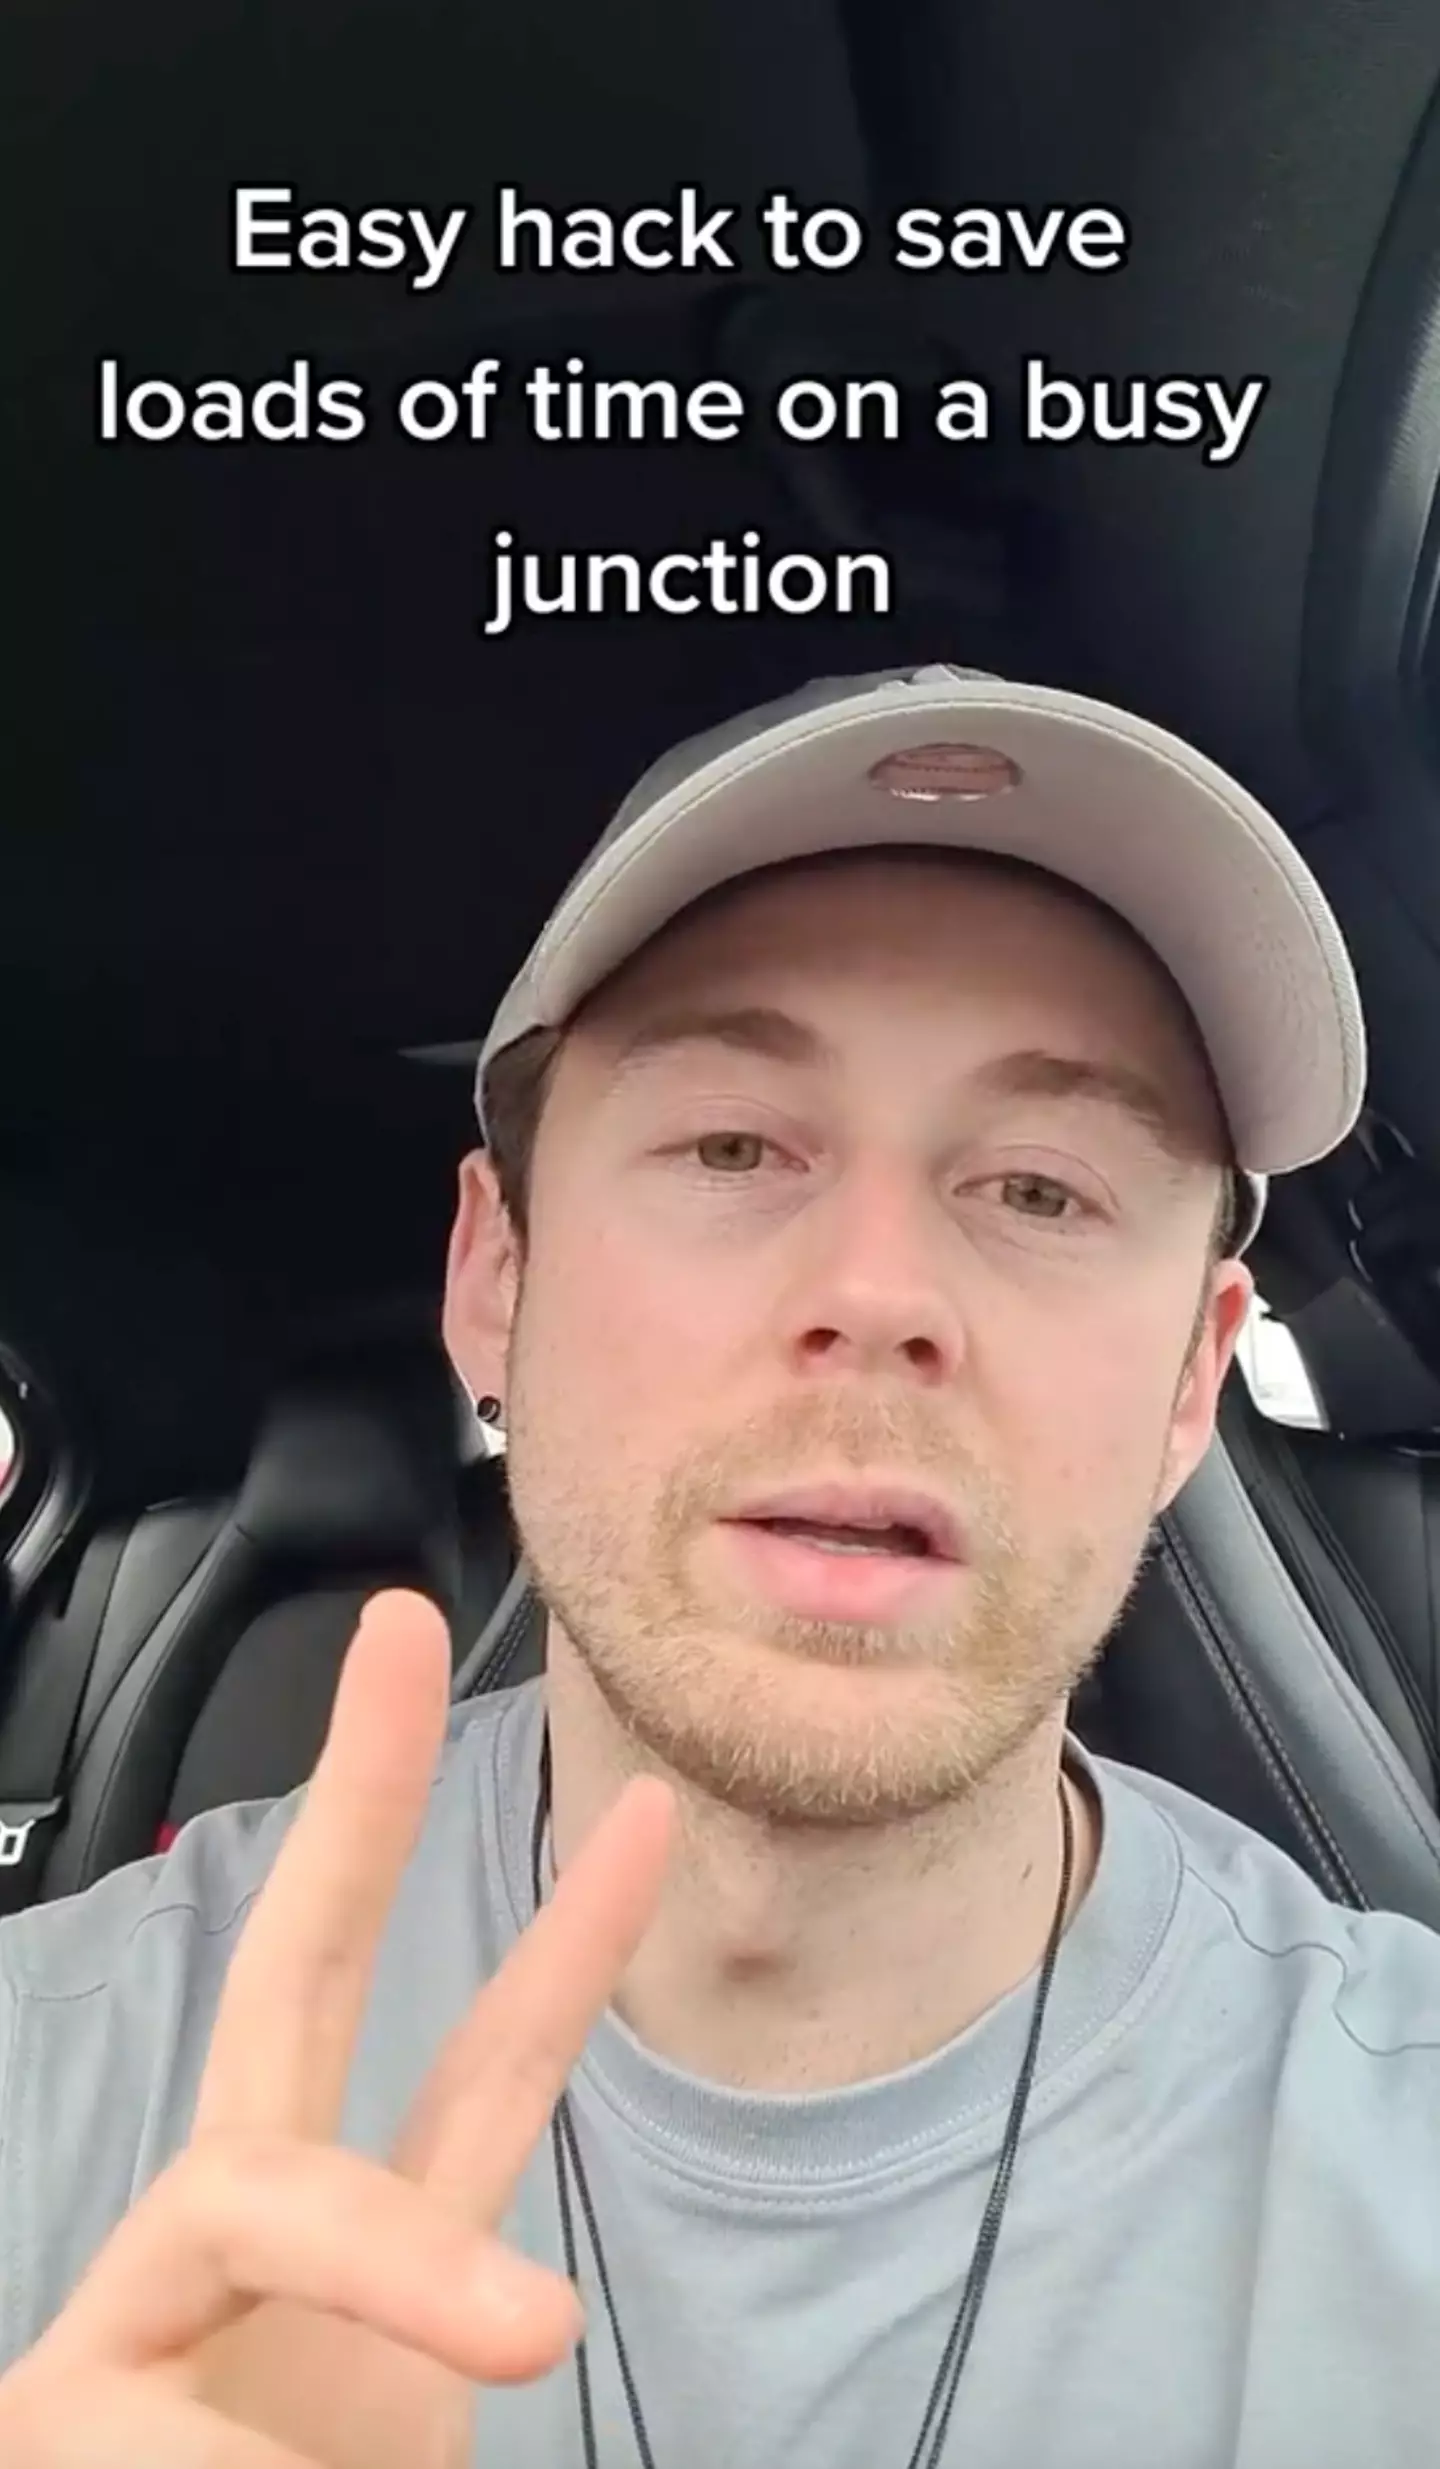 The TikTok user says it saves time and ‘road rage’.